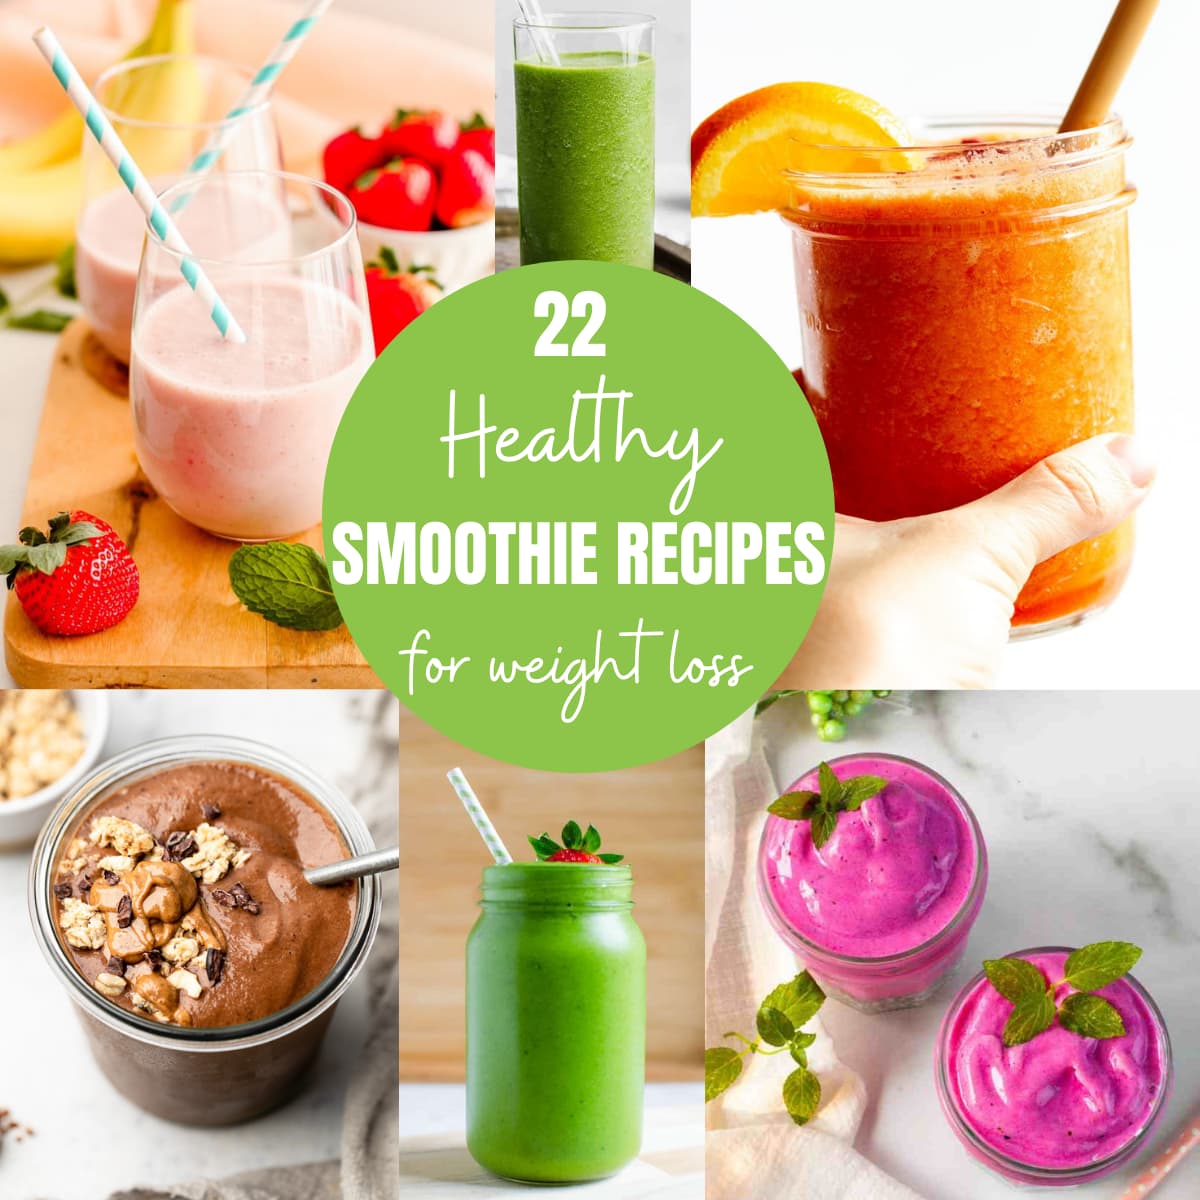 Weight-Loss Smoothies: Healthy and Delicious Smoothies Recipes to